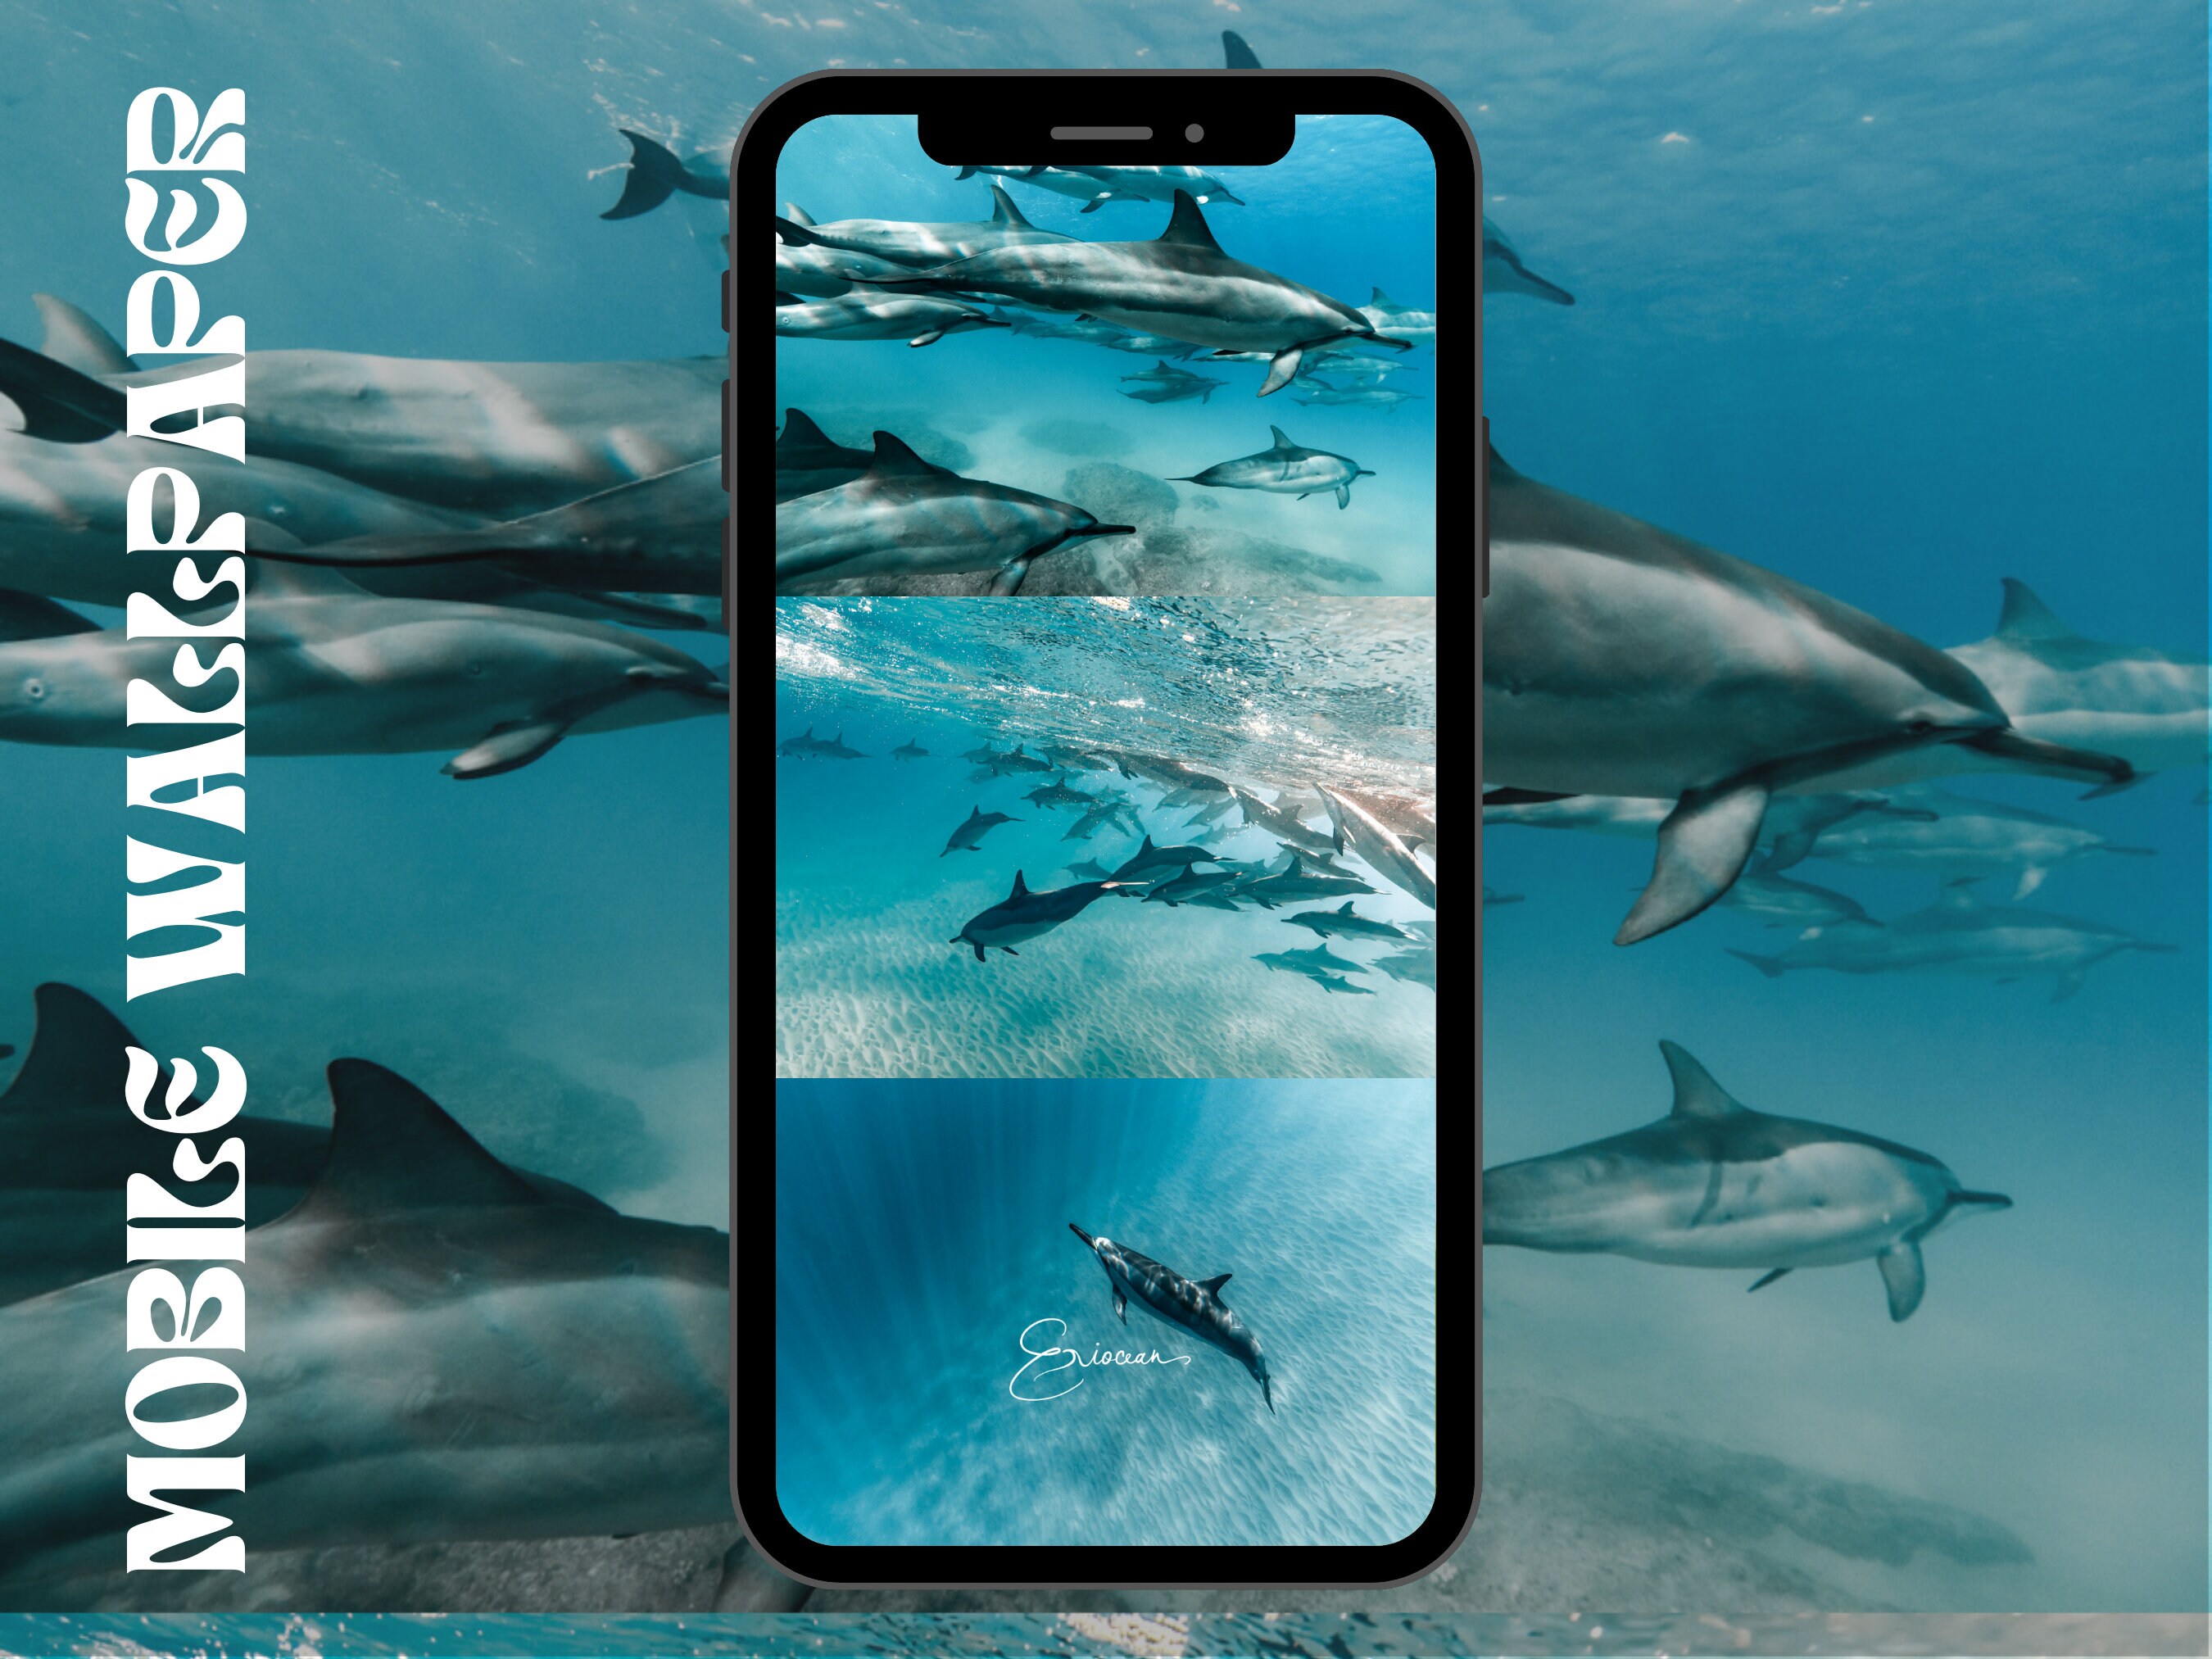 Dolphins Video Live Wallpaper by Wallpapers Studio Pro - (Android Apps) —  AppAgg